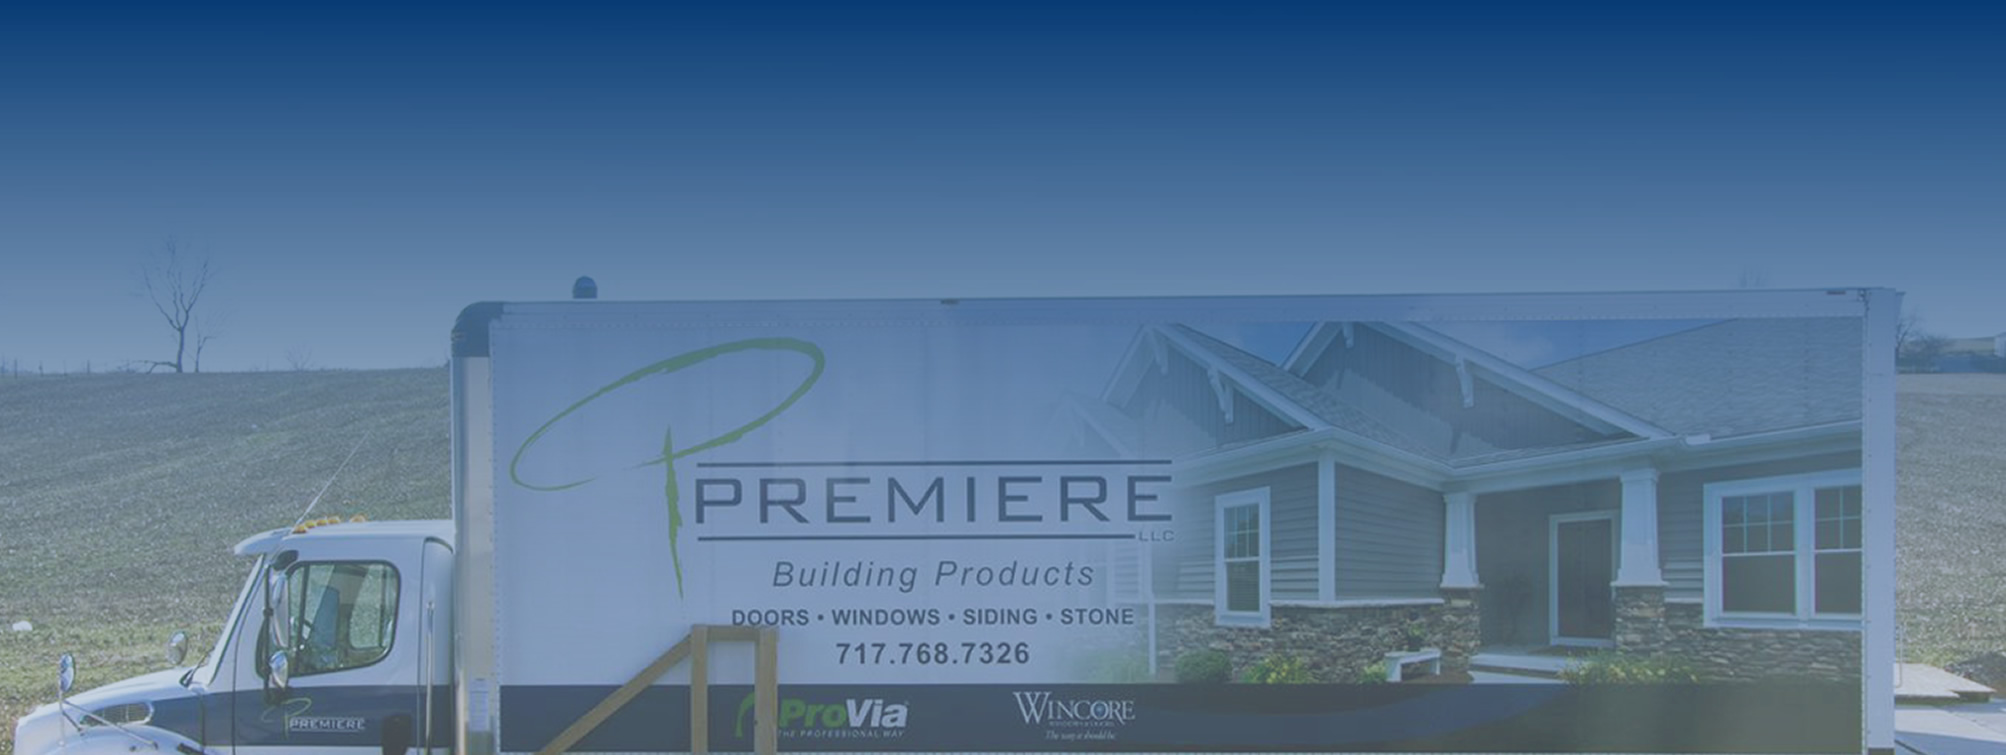 Premier LLC Delivers Building Supplies with Speed and Efficiency